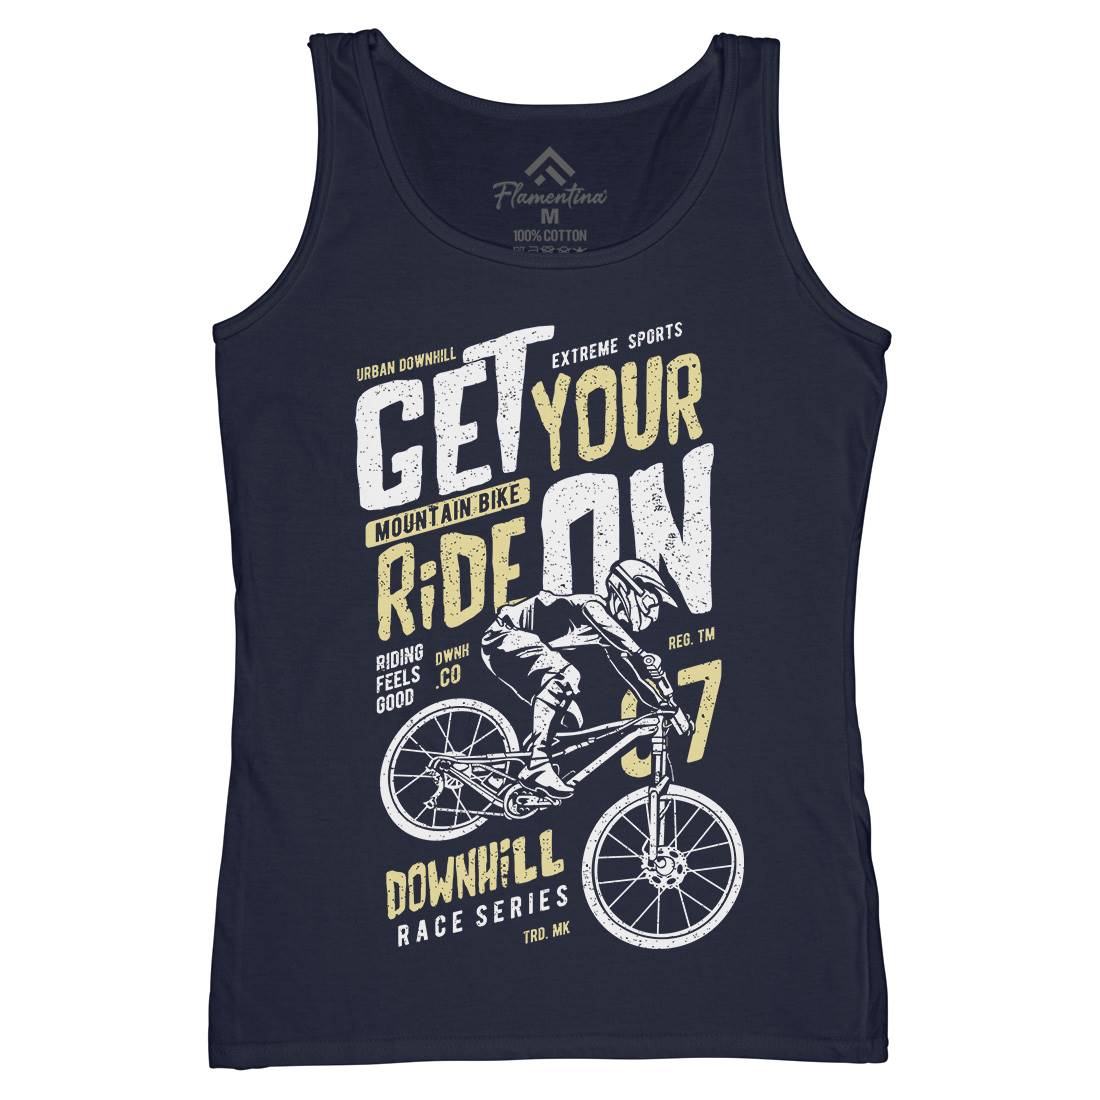 Get Your Ride Womens Organic Tank Top Vest Bikes A673